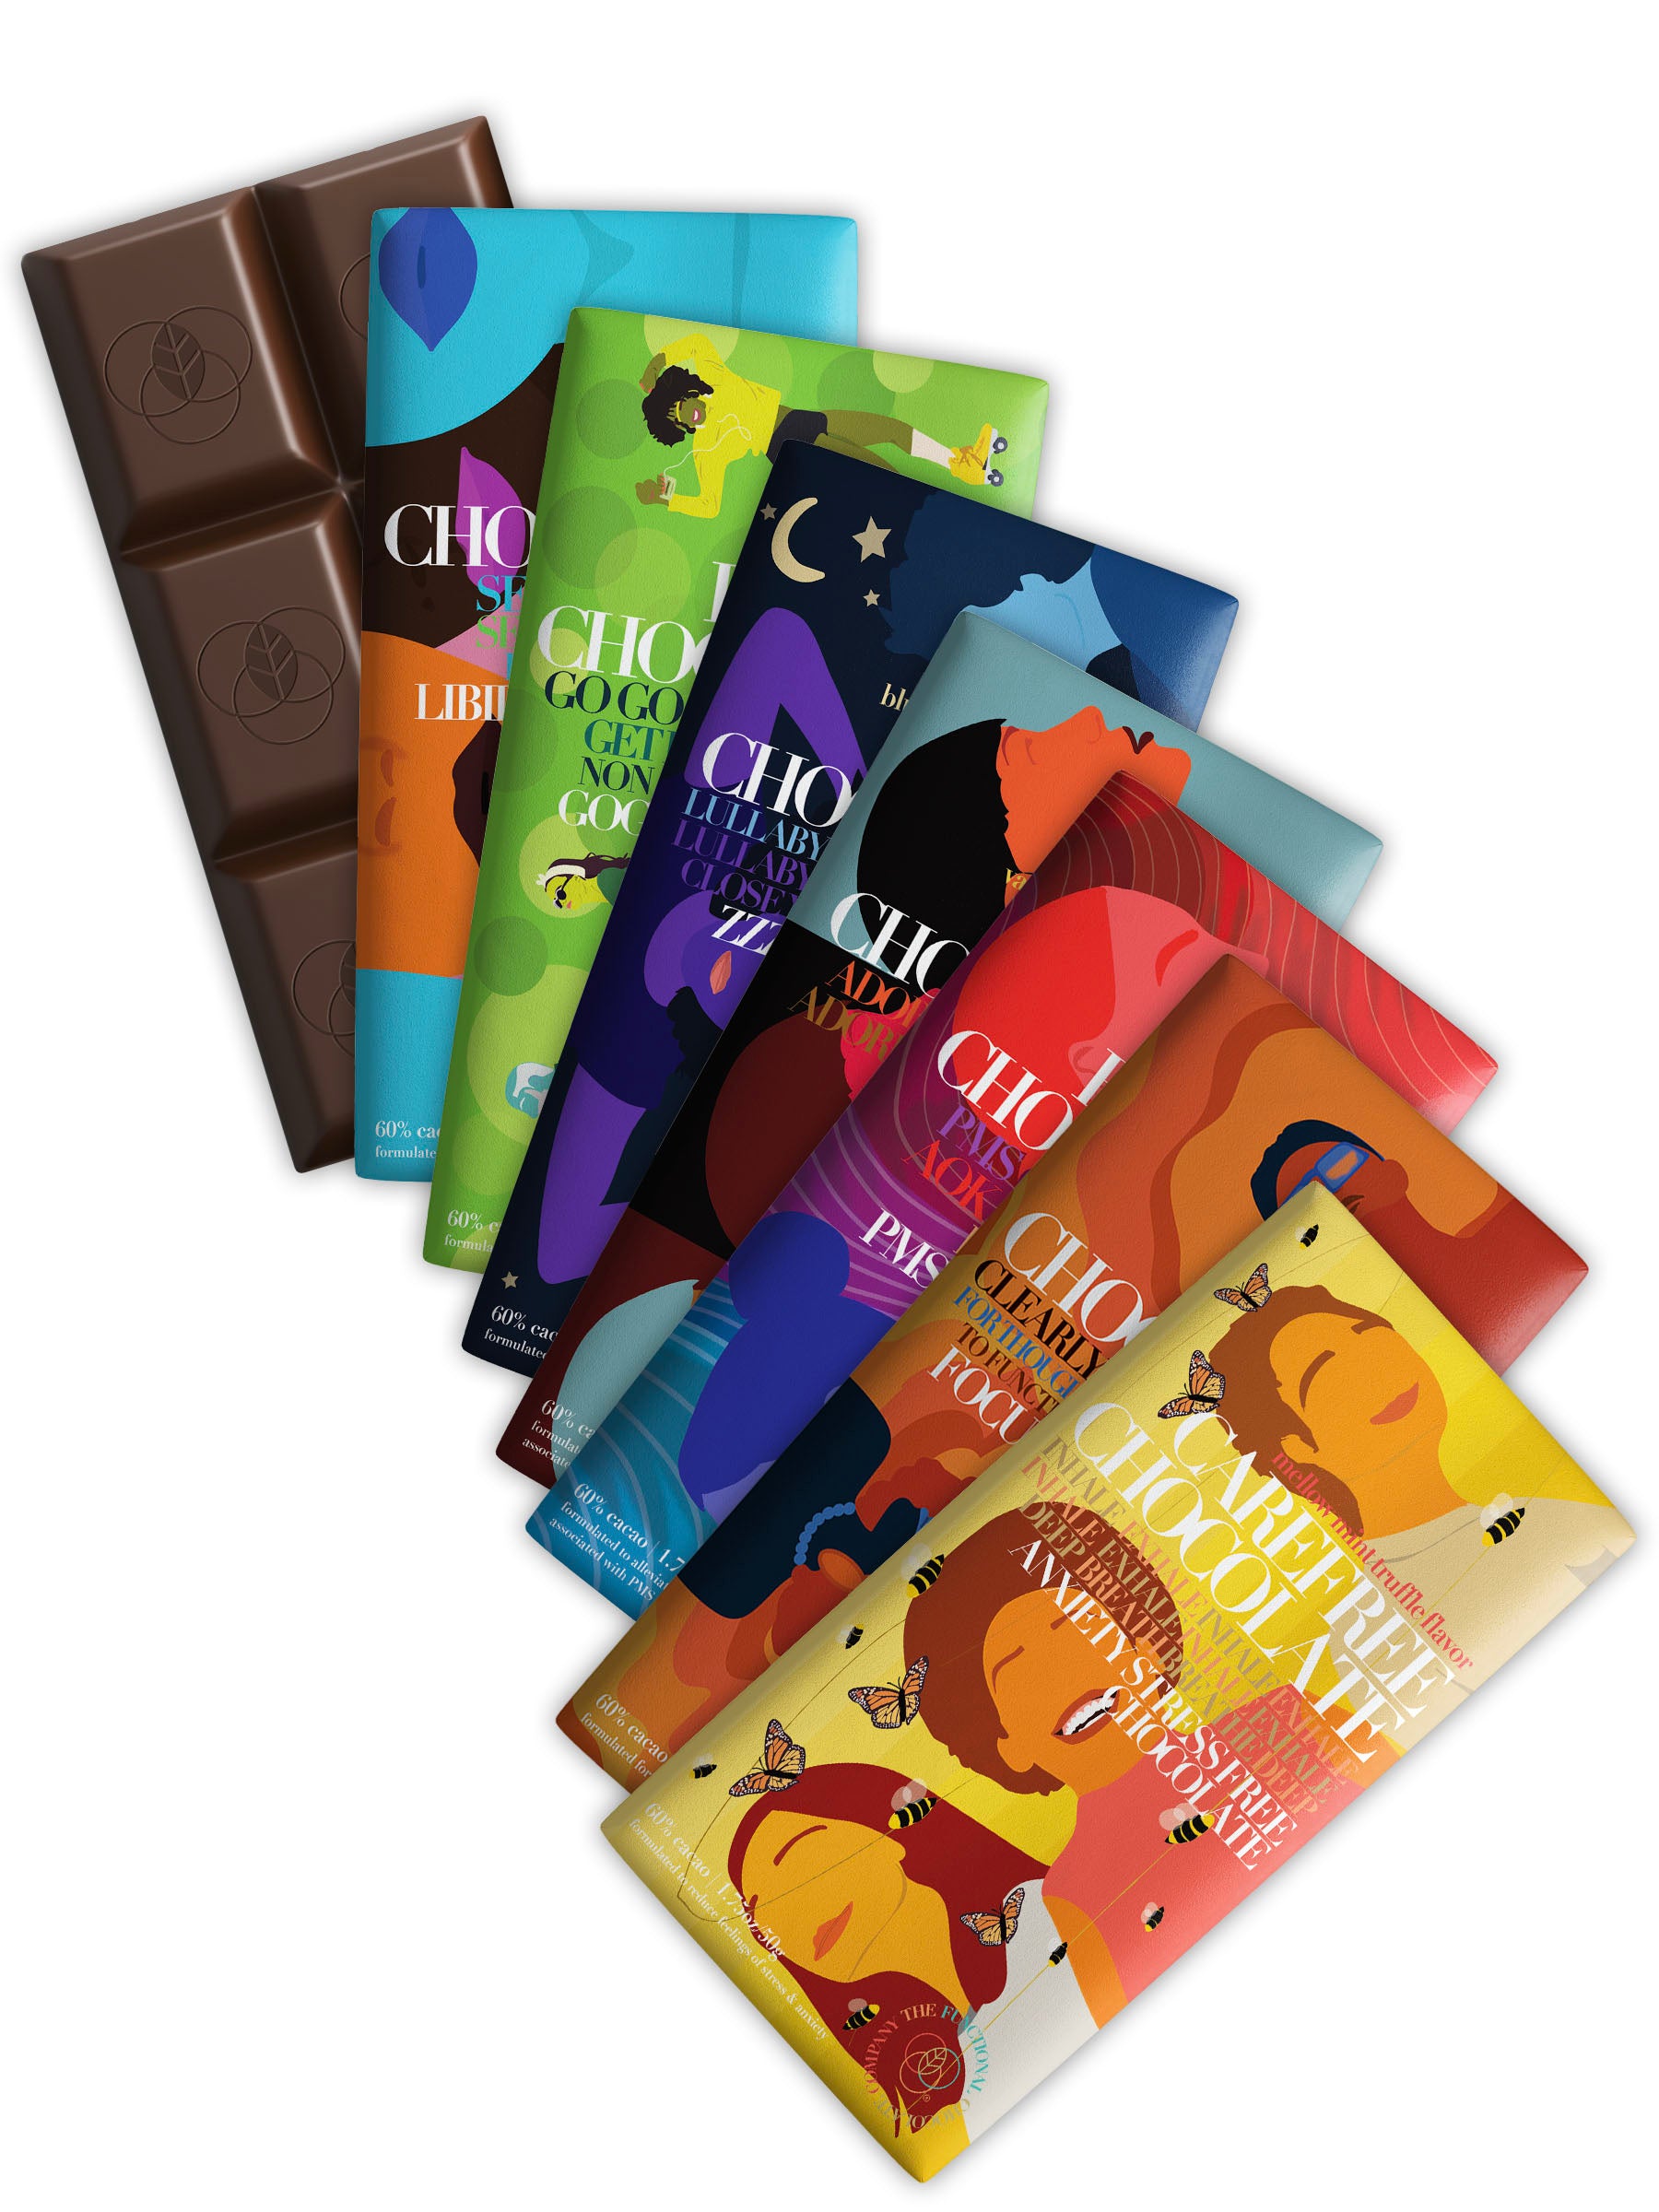 Functional Chocolate Bars with herbs & nutrients